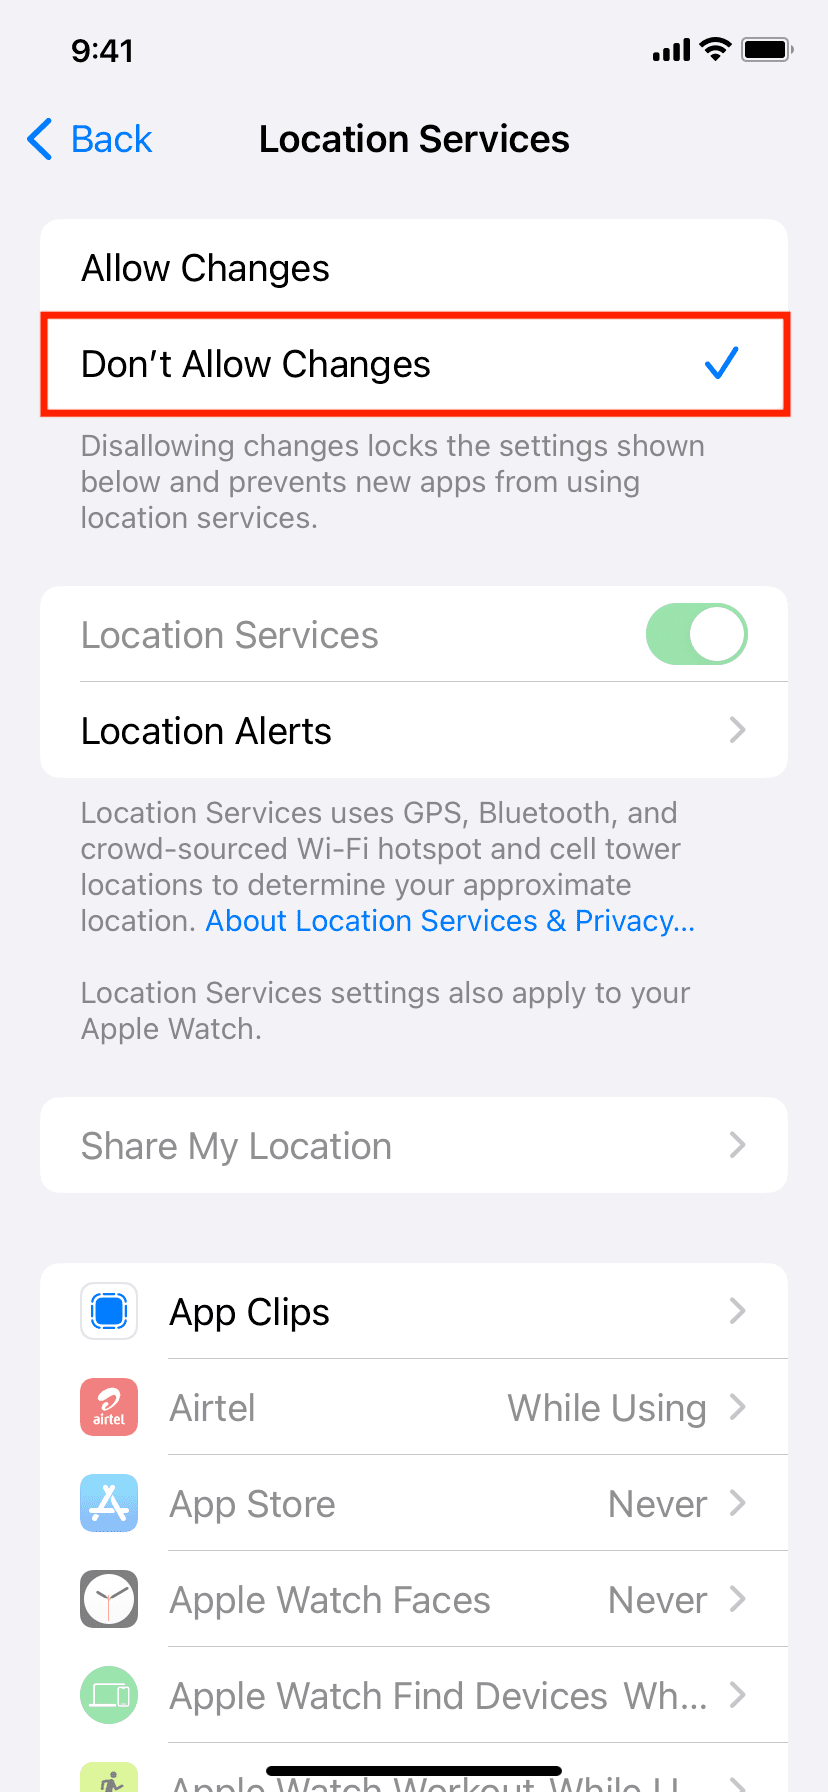 Do not allow changes to Location Services on iPhone